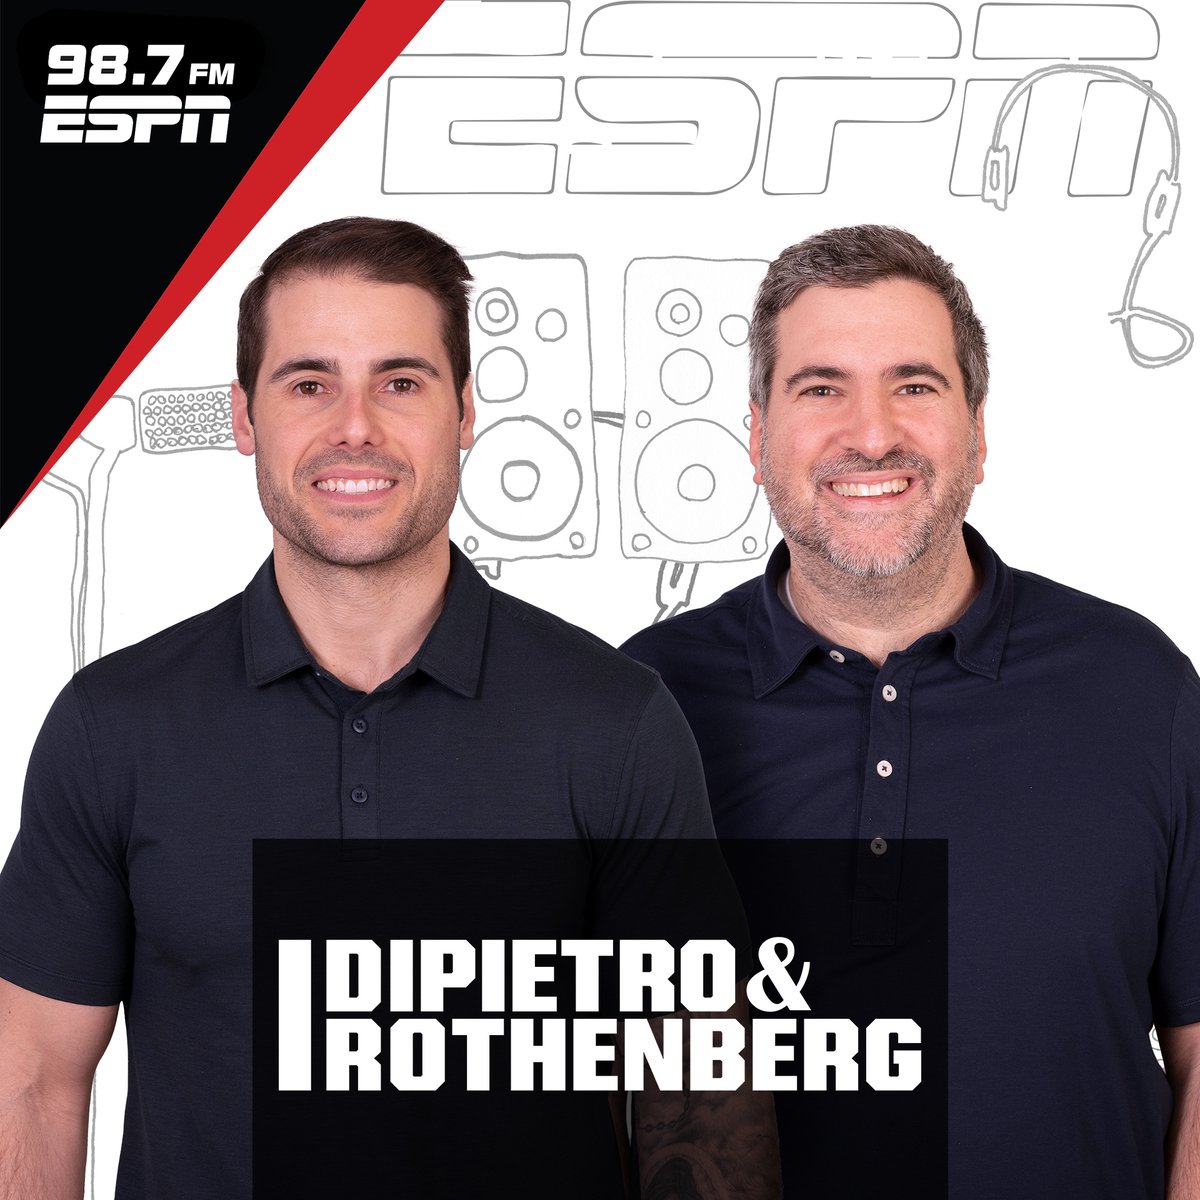 SHOW TIME! @HDumpty39 & @RothenbergESPN are on! The #Mets are a disaster. After the Jorge Lopez debacle, where do they go from here? Plus, the #Yankees win, a #Rangers preview & Robert Saleh speaks. Listen on @ESPNNY98_7FM, the ESPN New York app or bit.ly/ListenESPNNY.